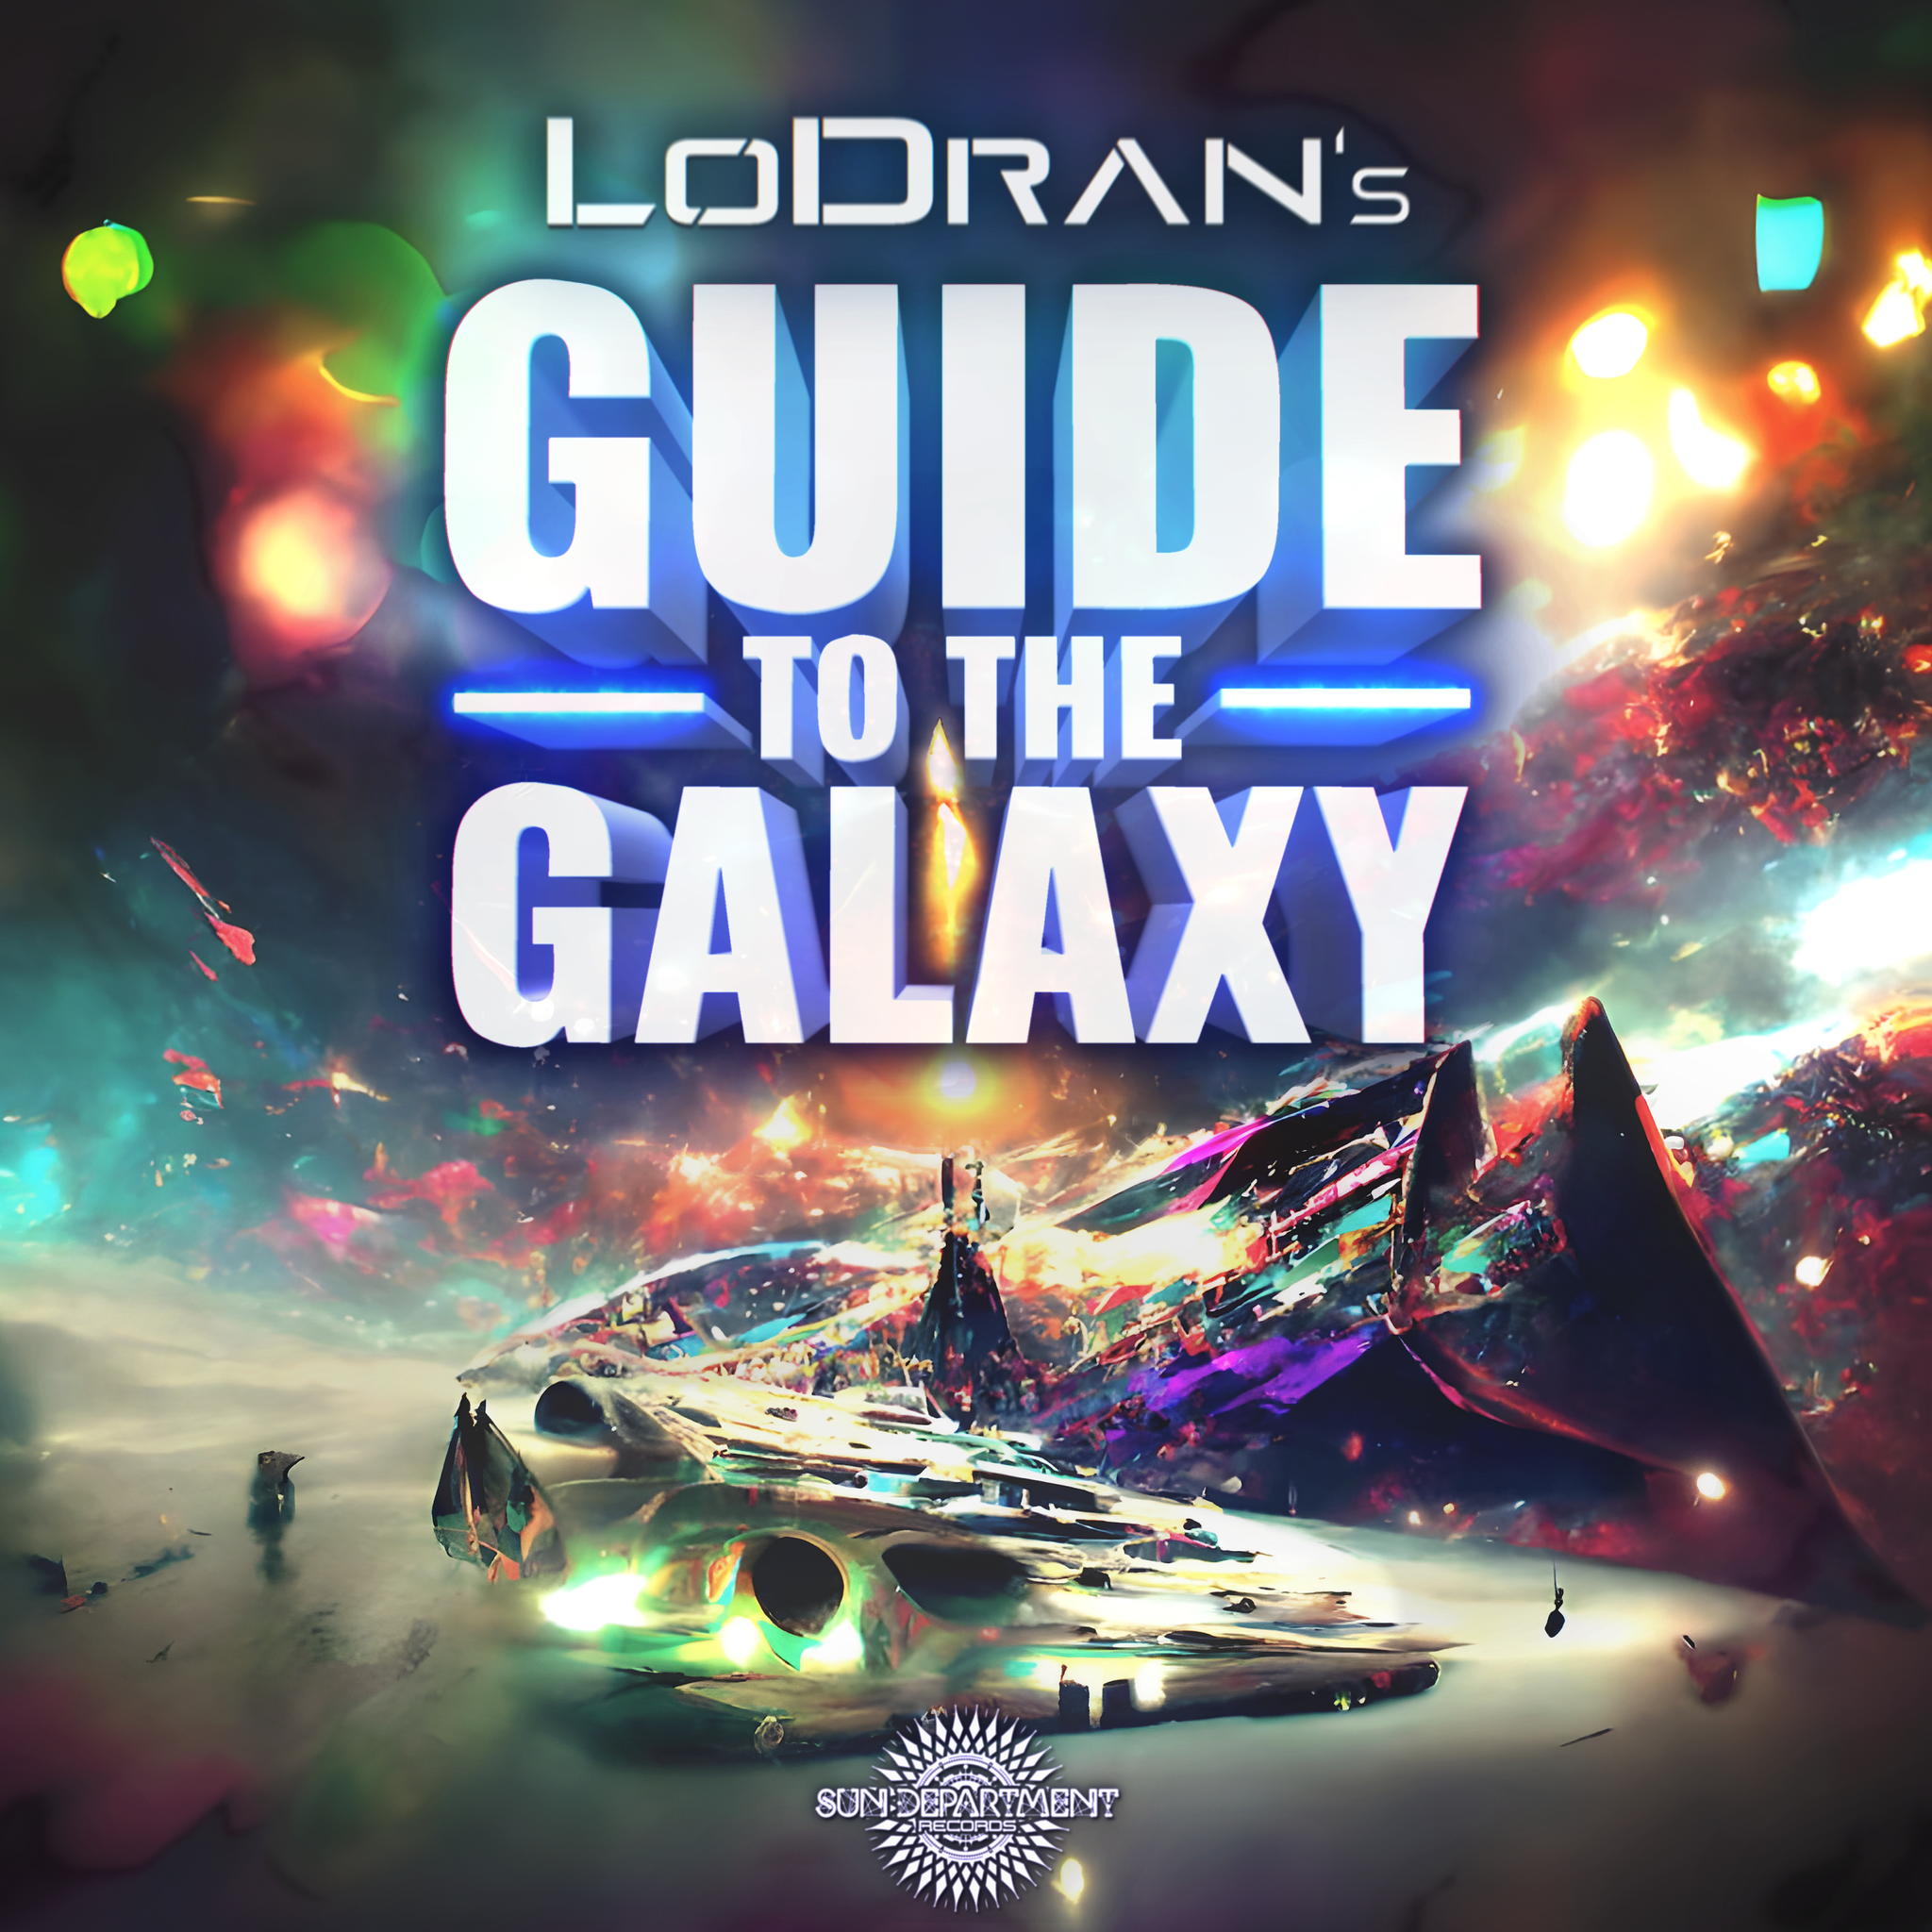 LoDran's Guide to the Galaxy